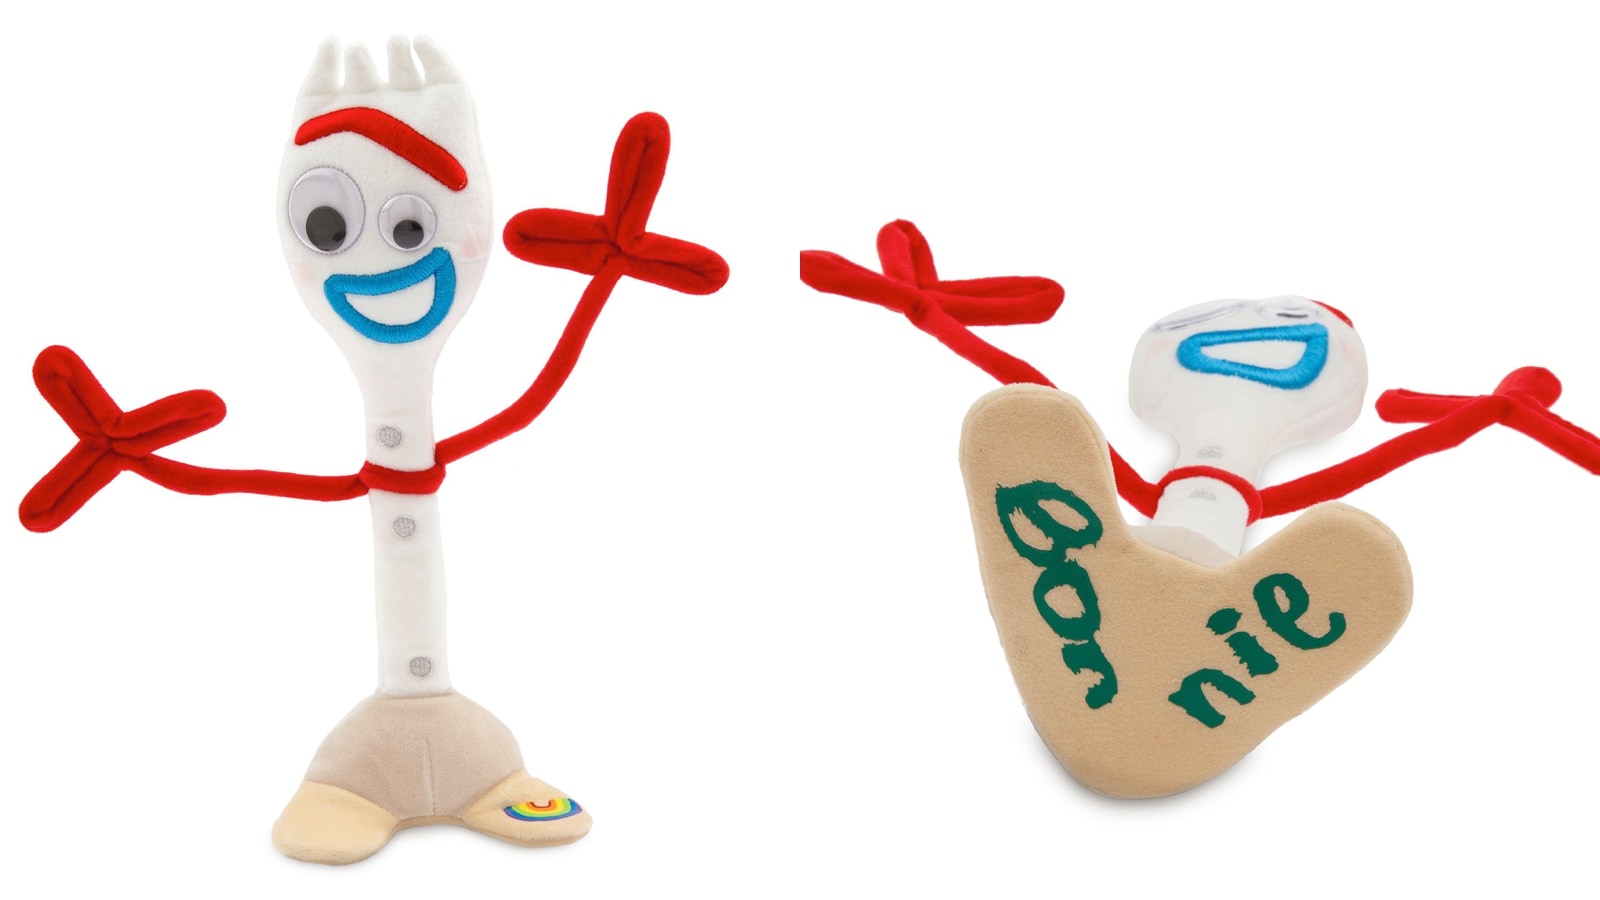 New Merchandise Inspired by Forky from Disney and Pixar's 'Toy